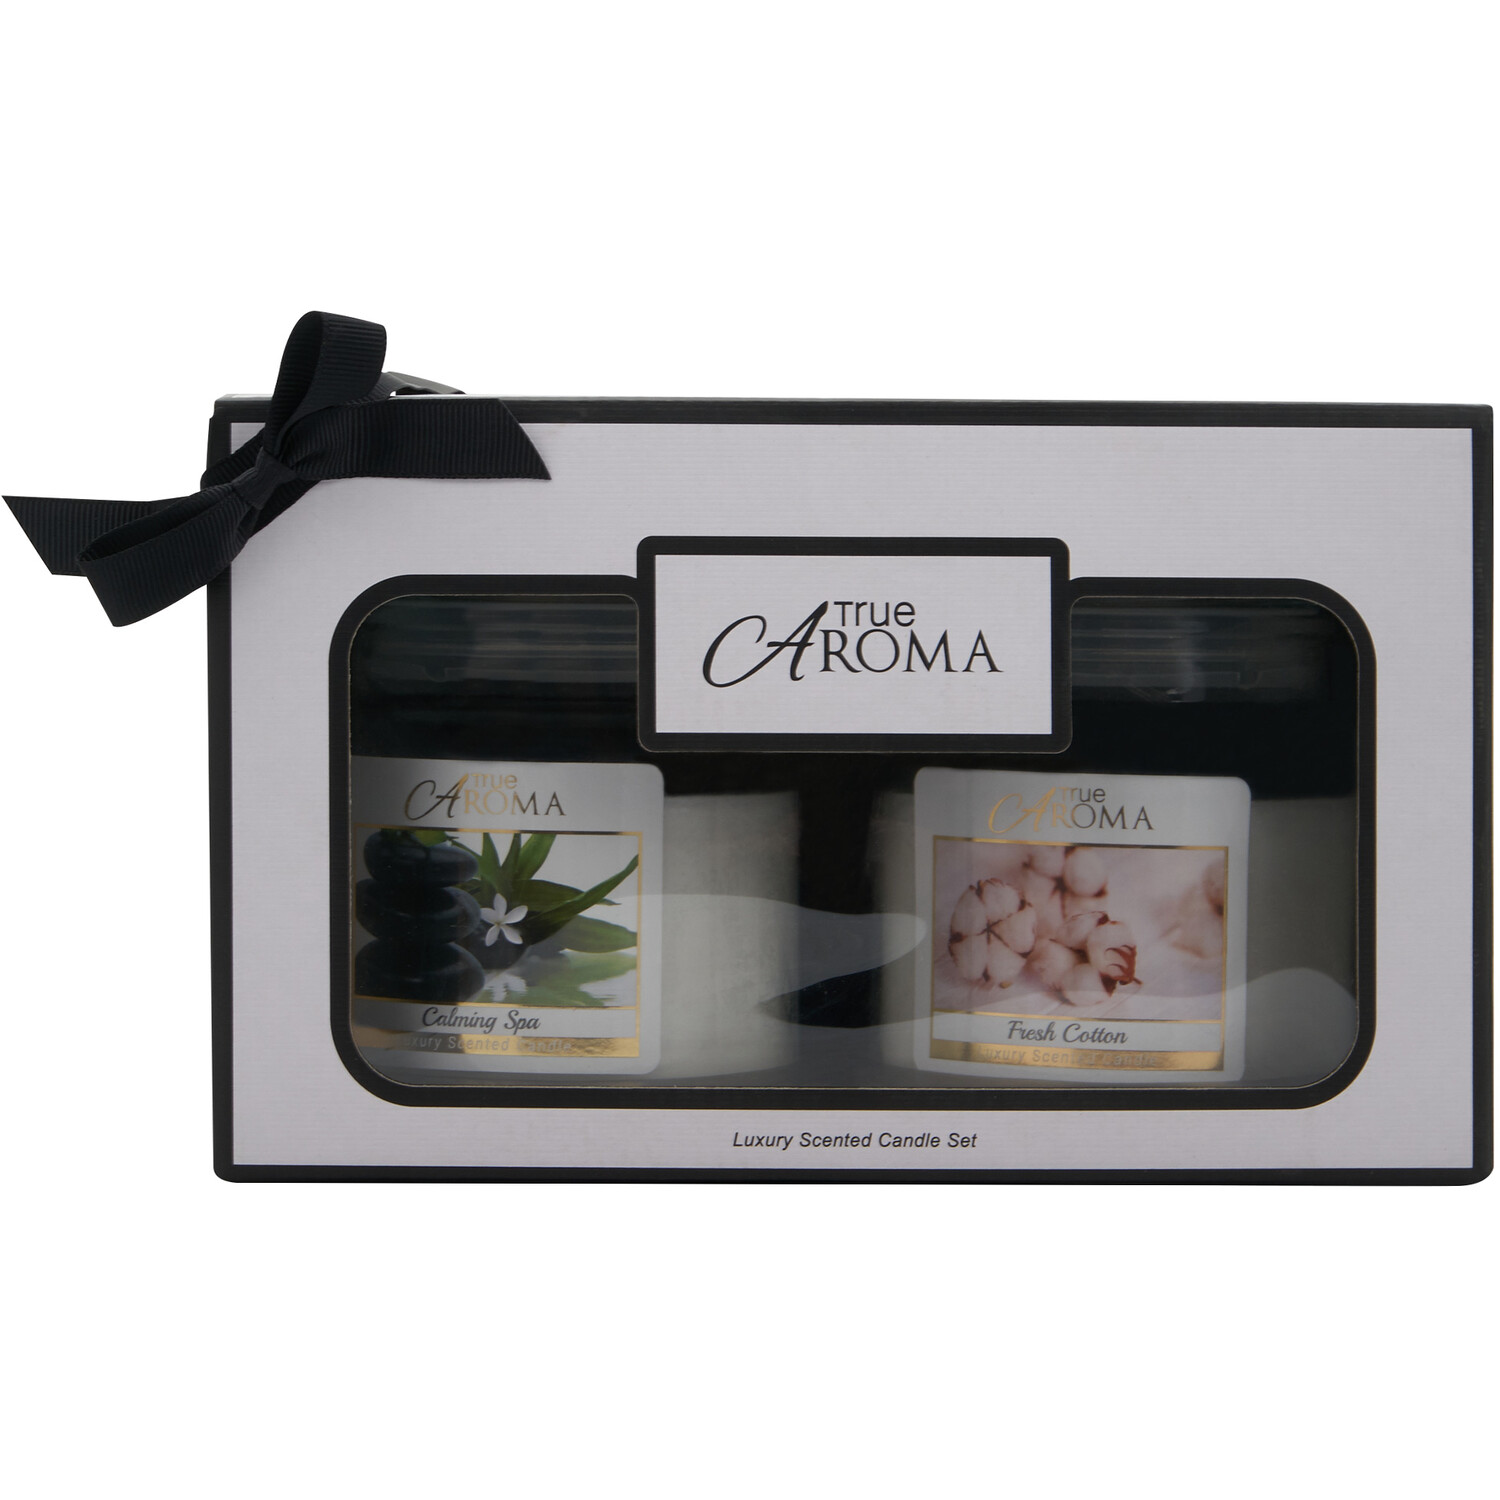 Calming Spa & Fresh Cotton Candle Pack - White Image 2